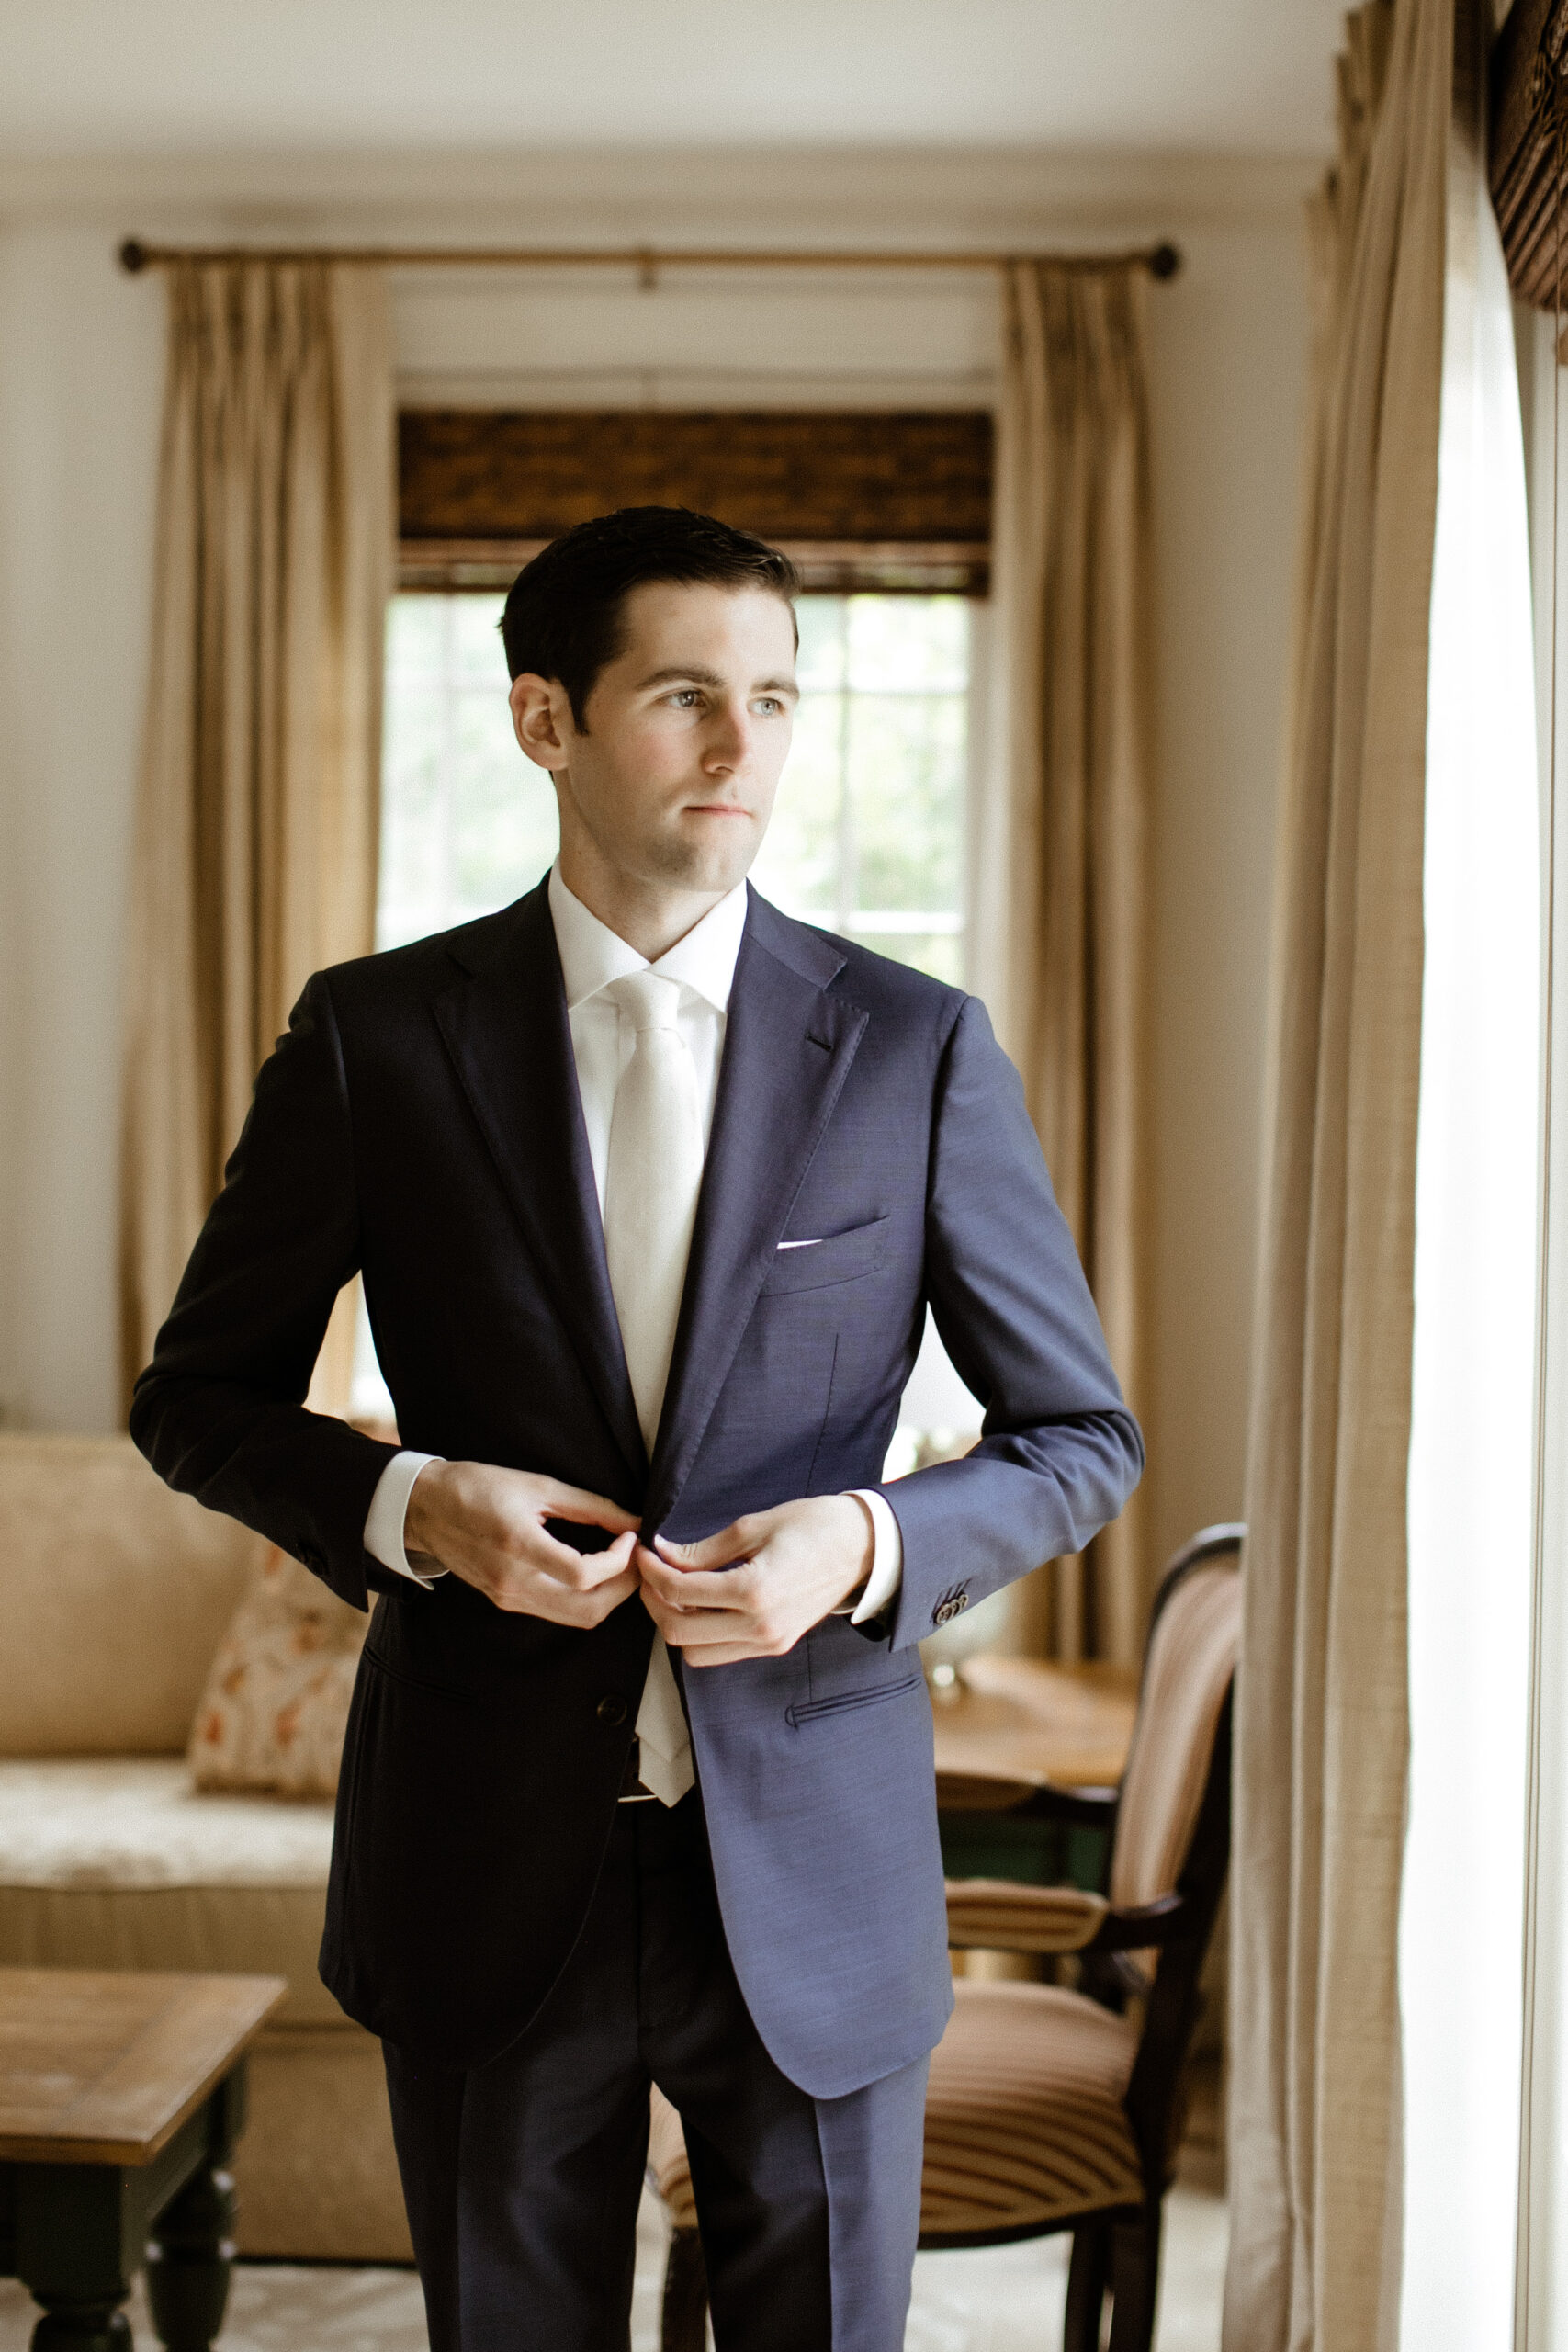 Handsome groom adds final touches as he prepares for he dreamy New York wedding